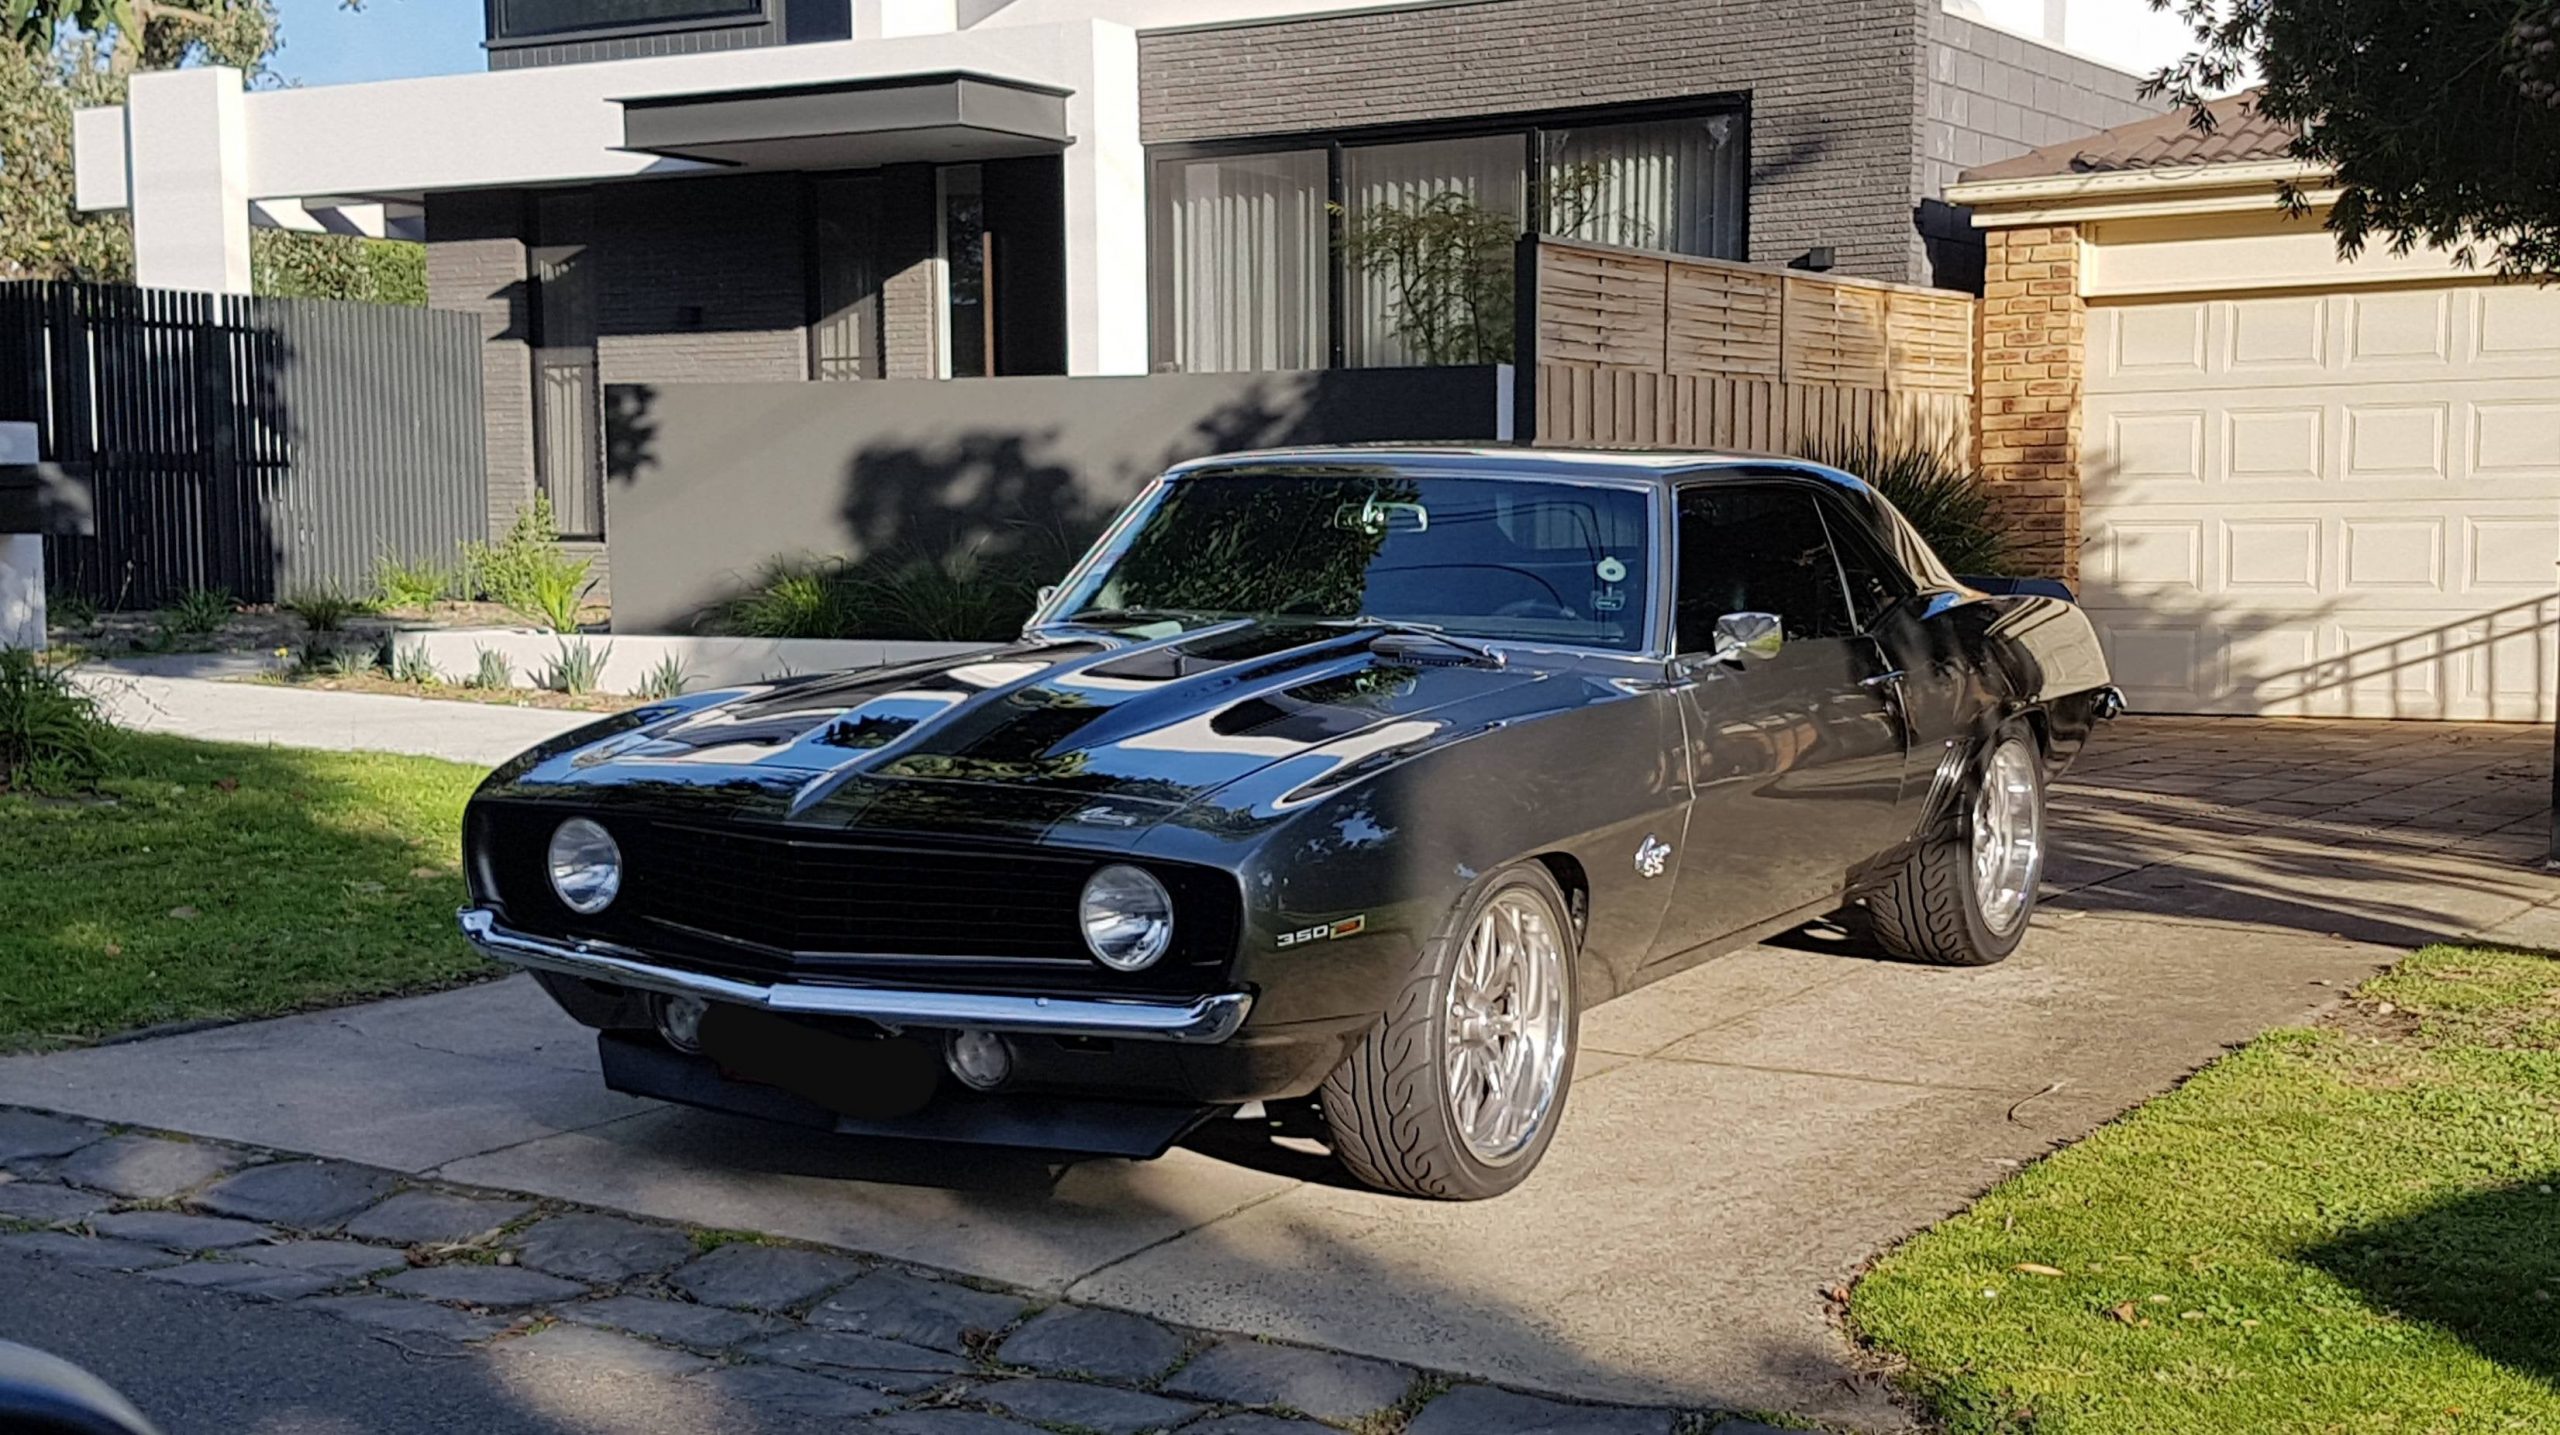 Bloke up the road from me owns a 69(?) Camaro with cams that sound like they want to fight